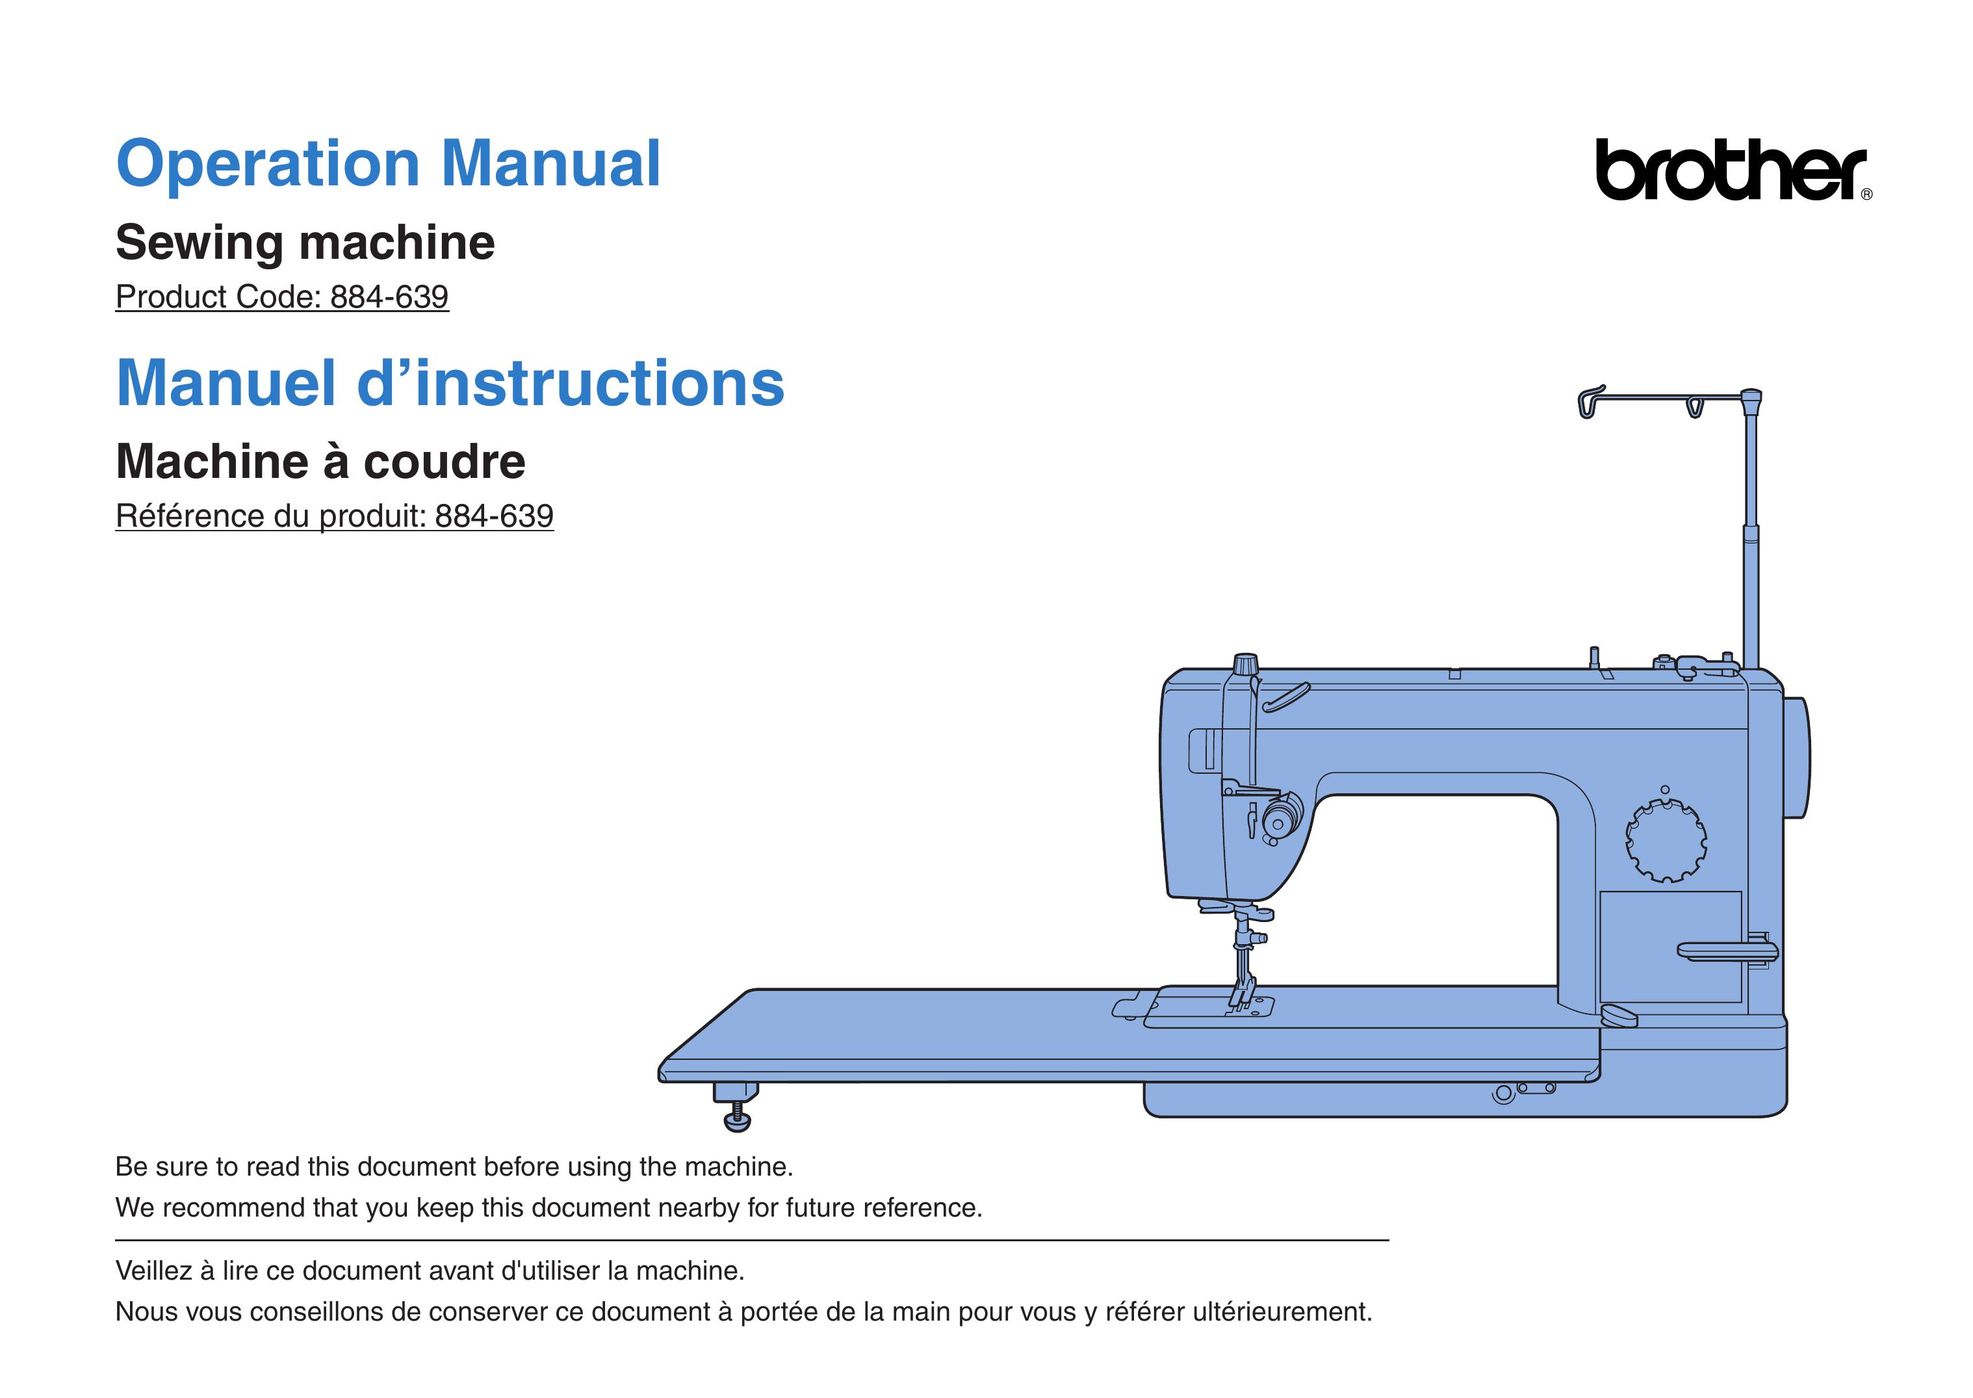 Brother 884-639 Sewing Machine User Manual